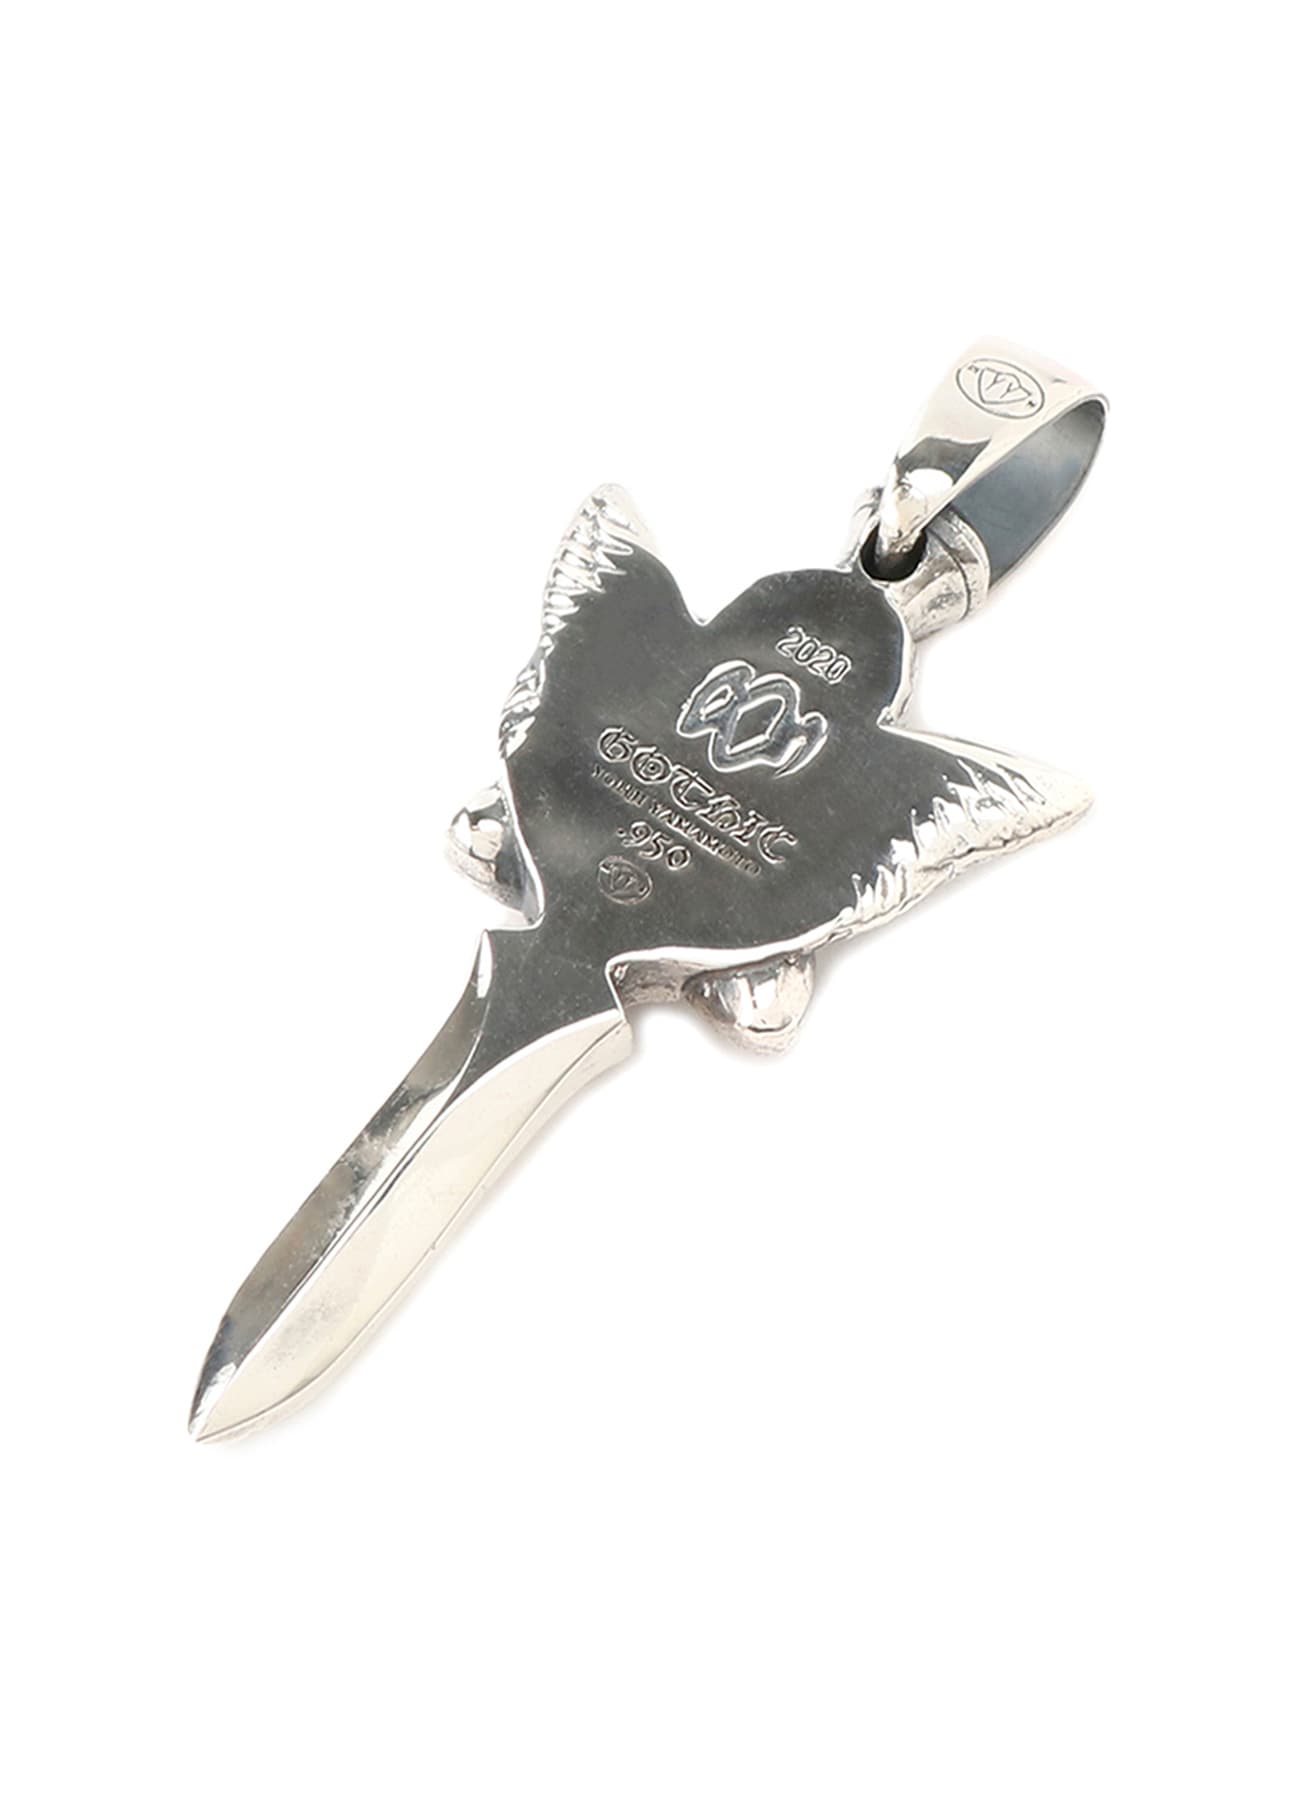 SILVER 950 ANGEL DAGGER PENDANT TOP(FREE SIZE Silver): GOTHIC 